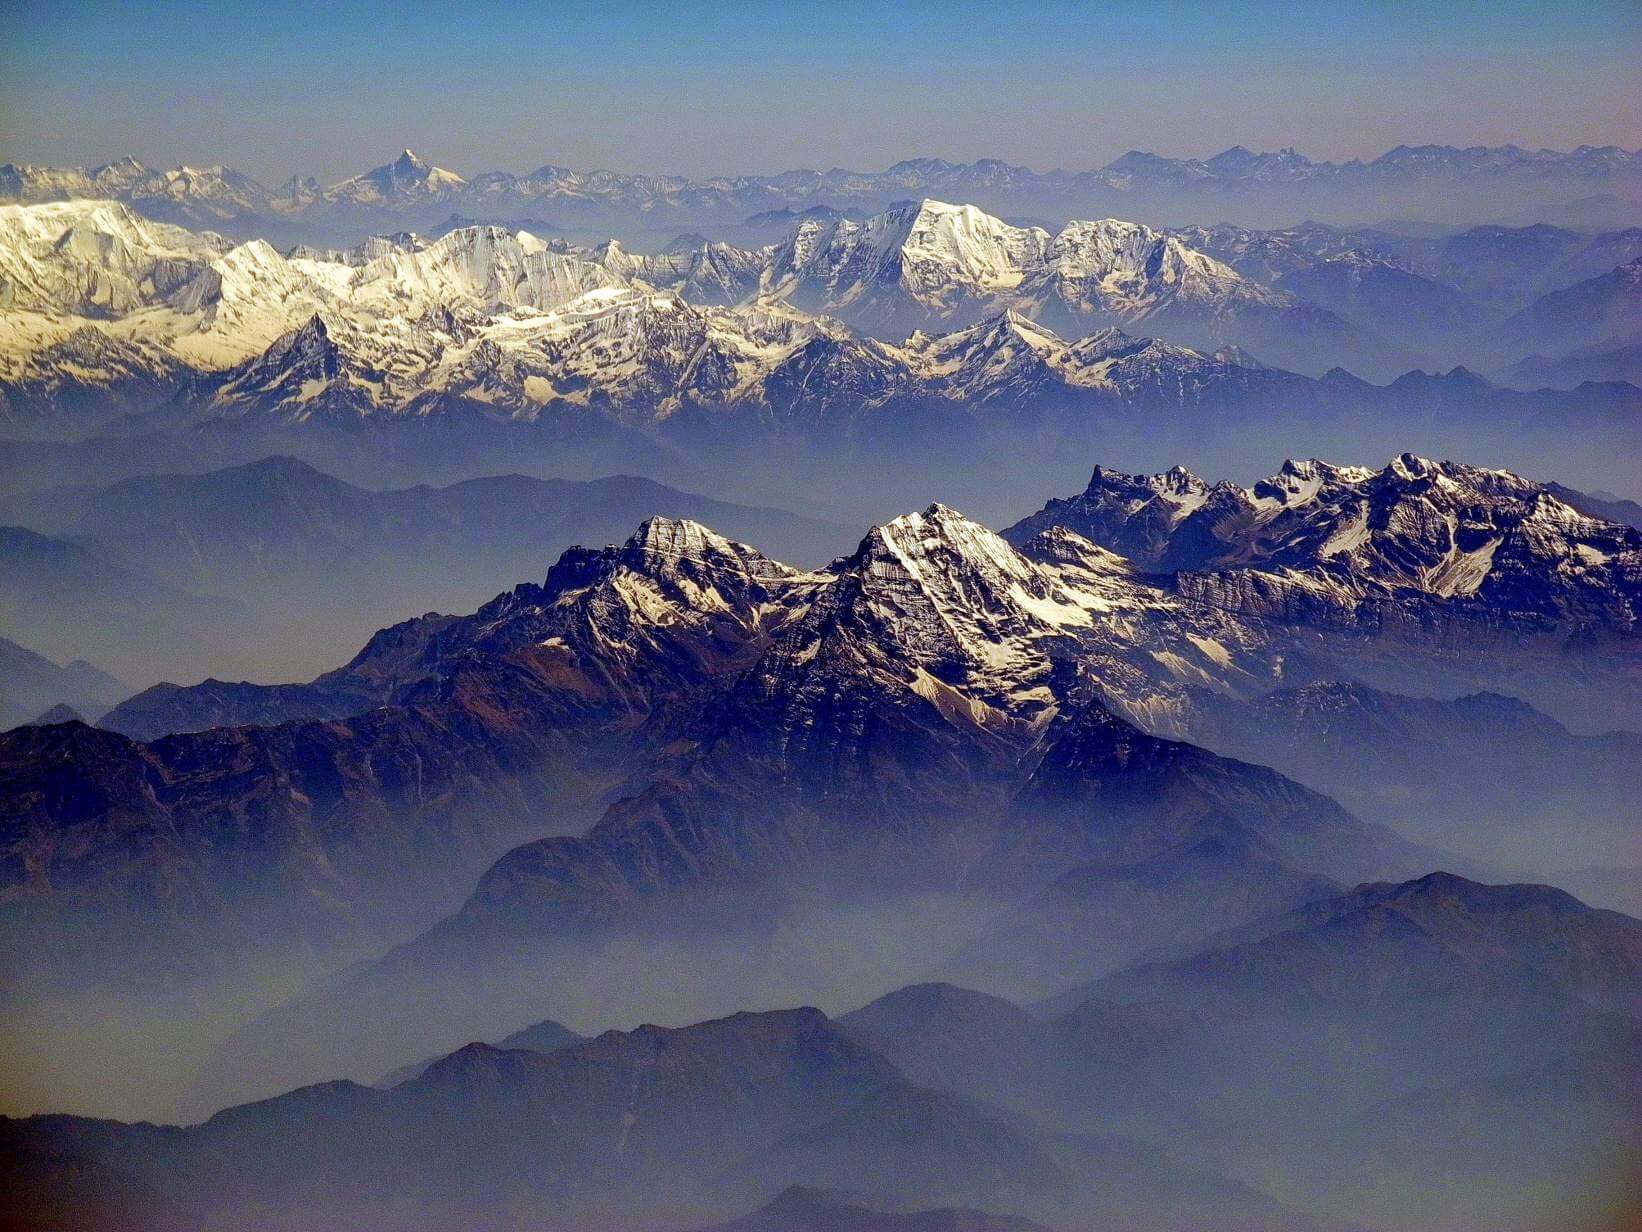 The mysterious Himalayan chain ©Wikimedia Commons